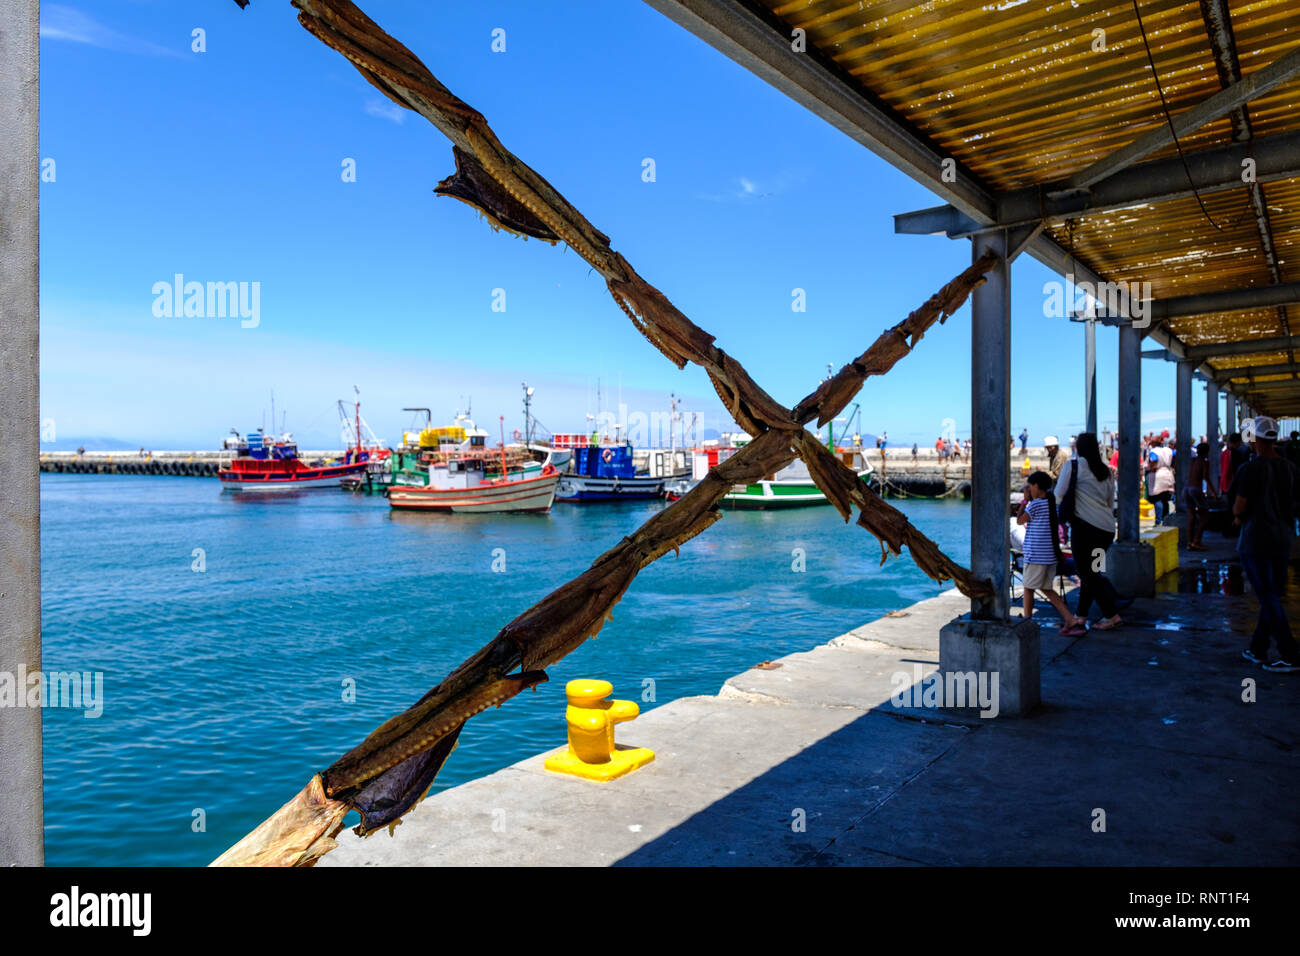 Fishing boats in Kalk Bay Harbour, near Cape Town, South Africa Stock Photo